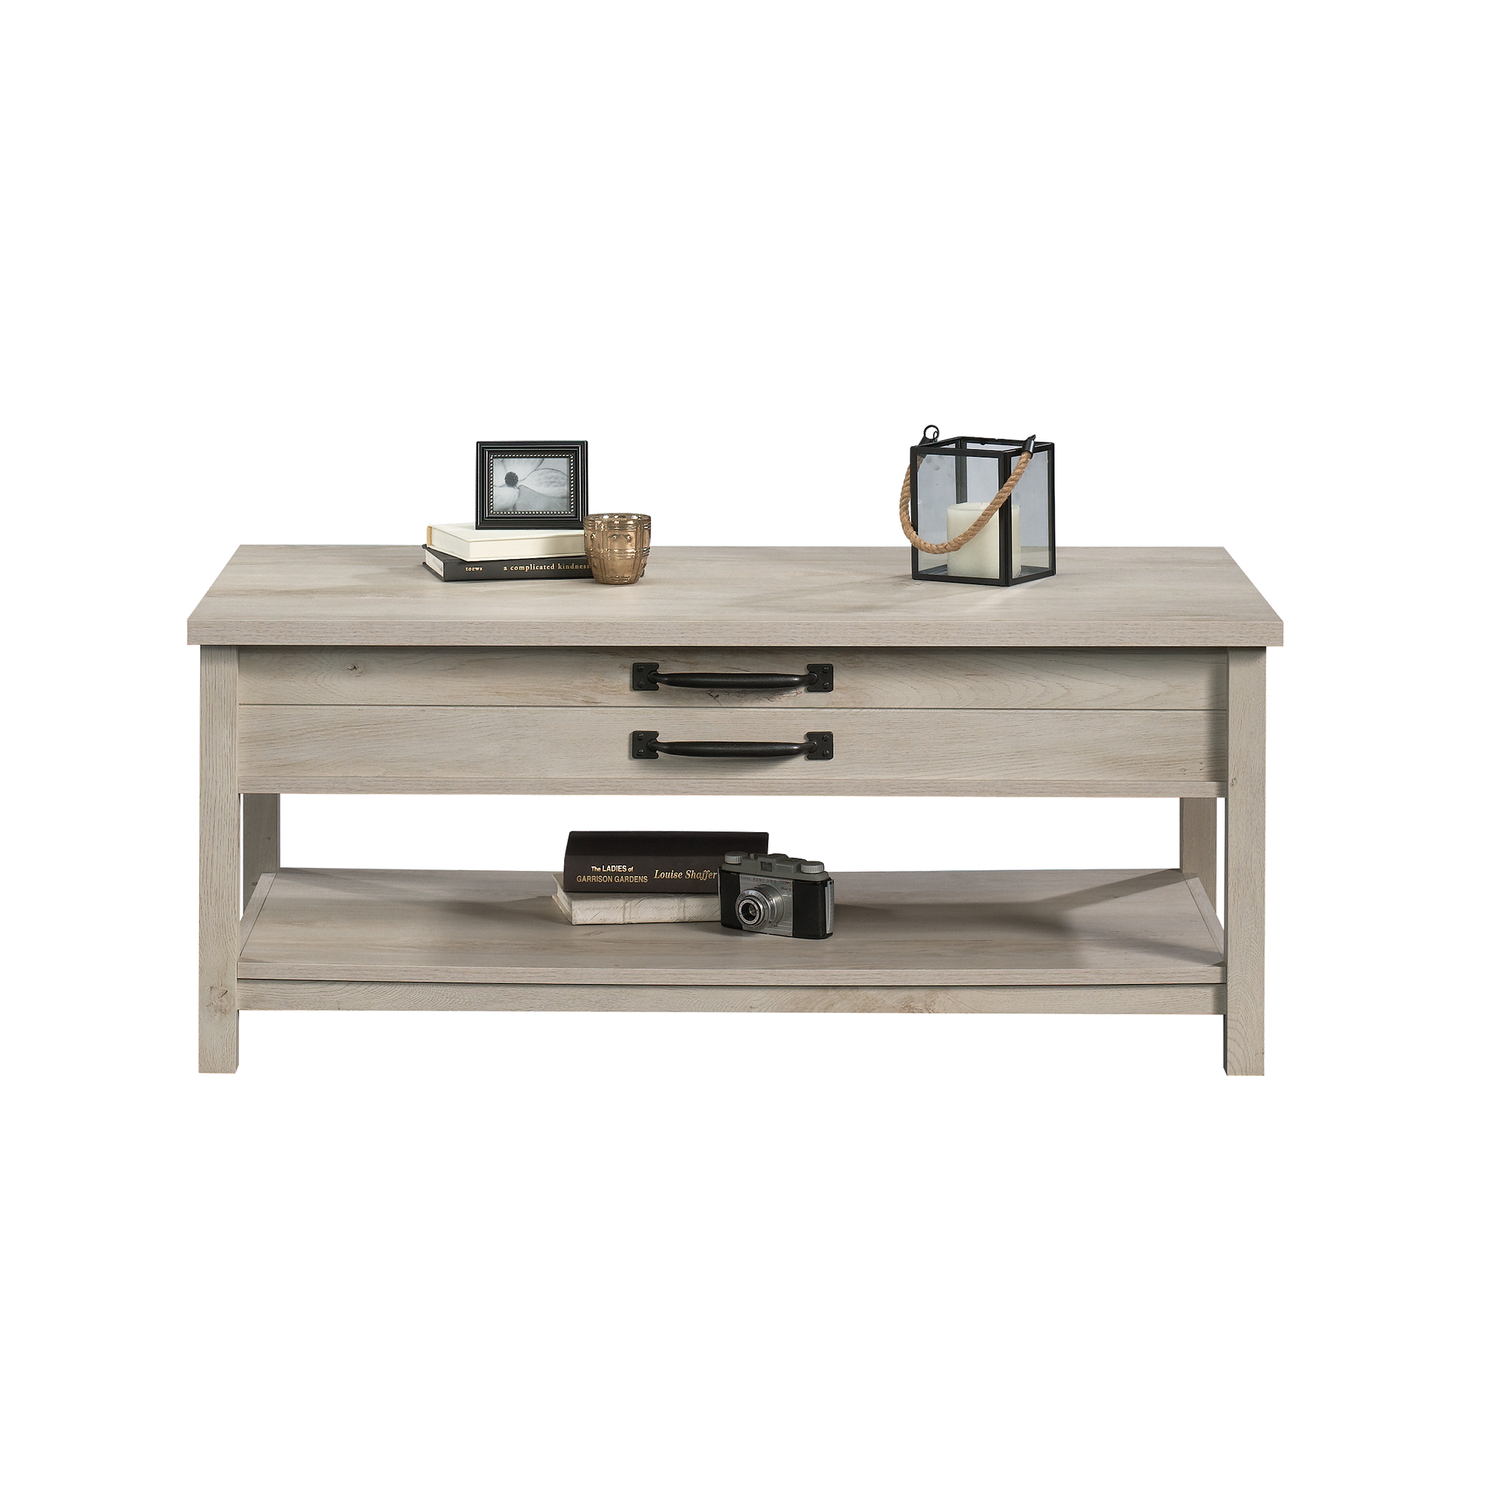 Modern Farmhouse Rectangle Lift Top Coffee Table, Rustic White